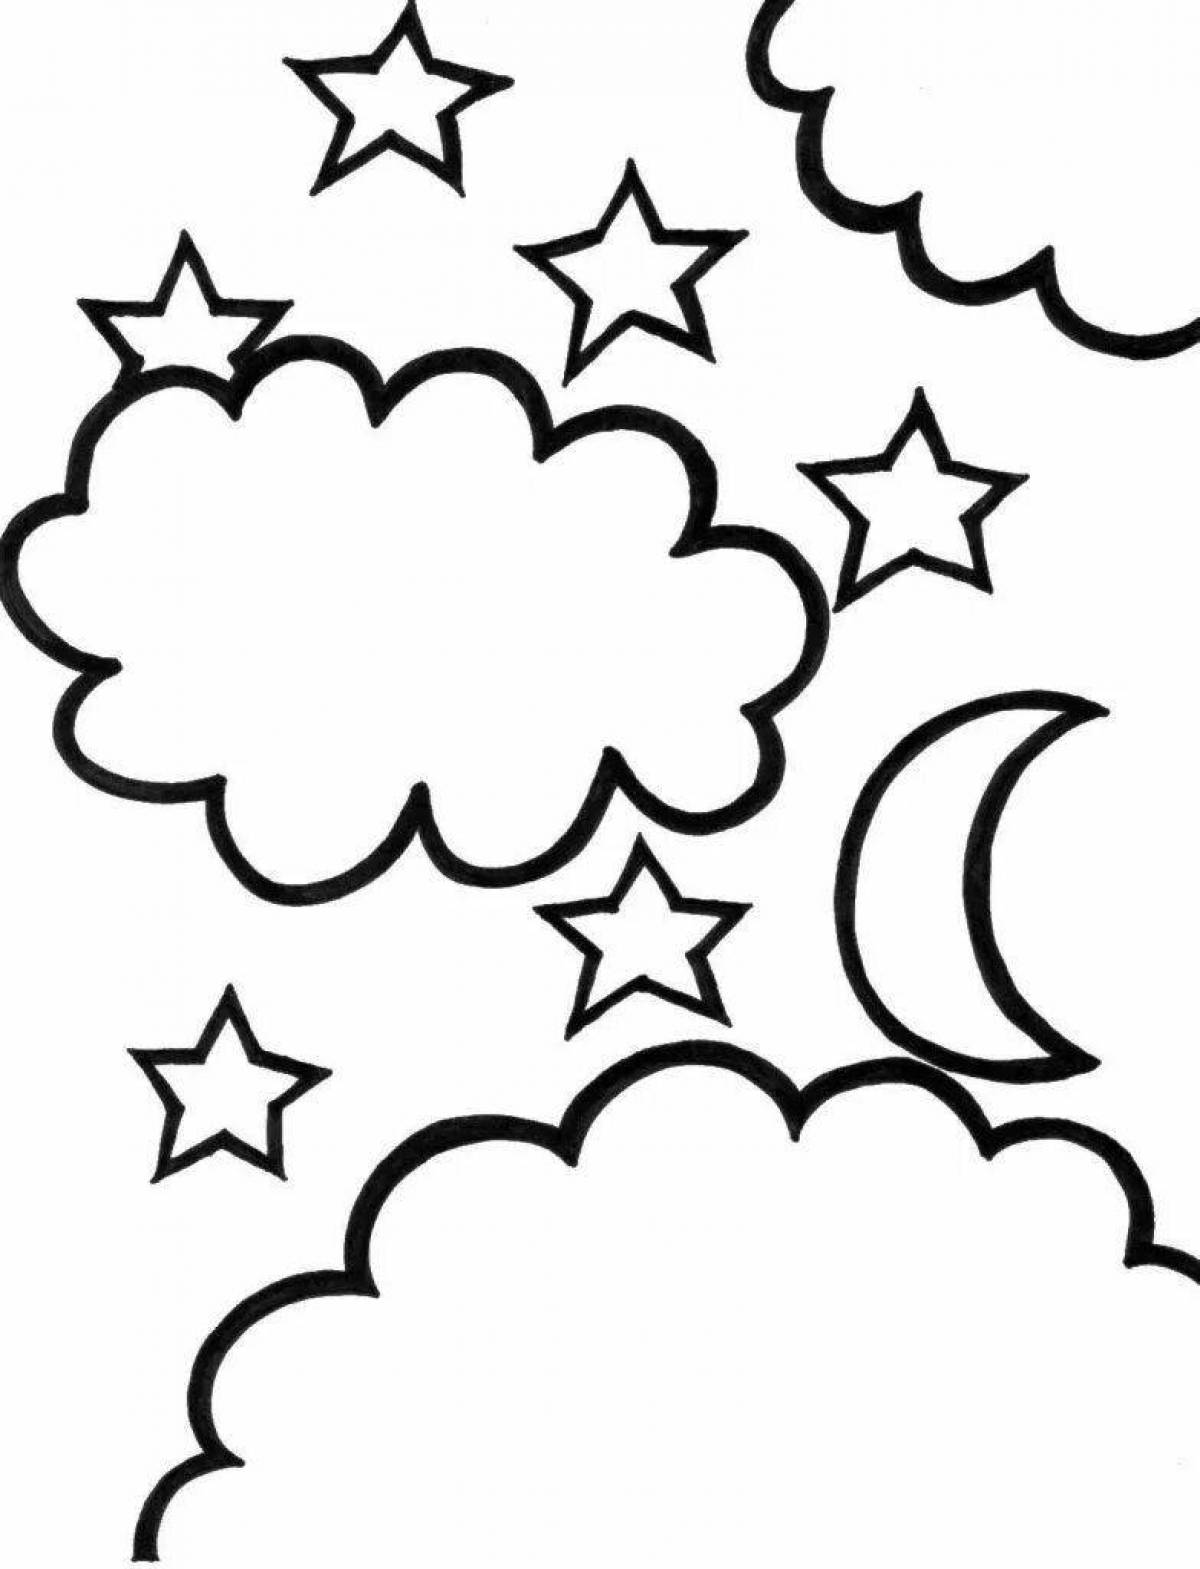 High night sky coloring page